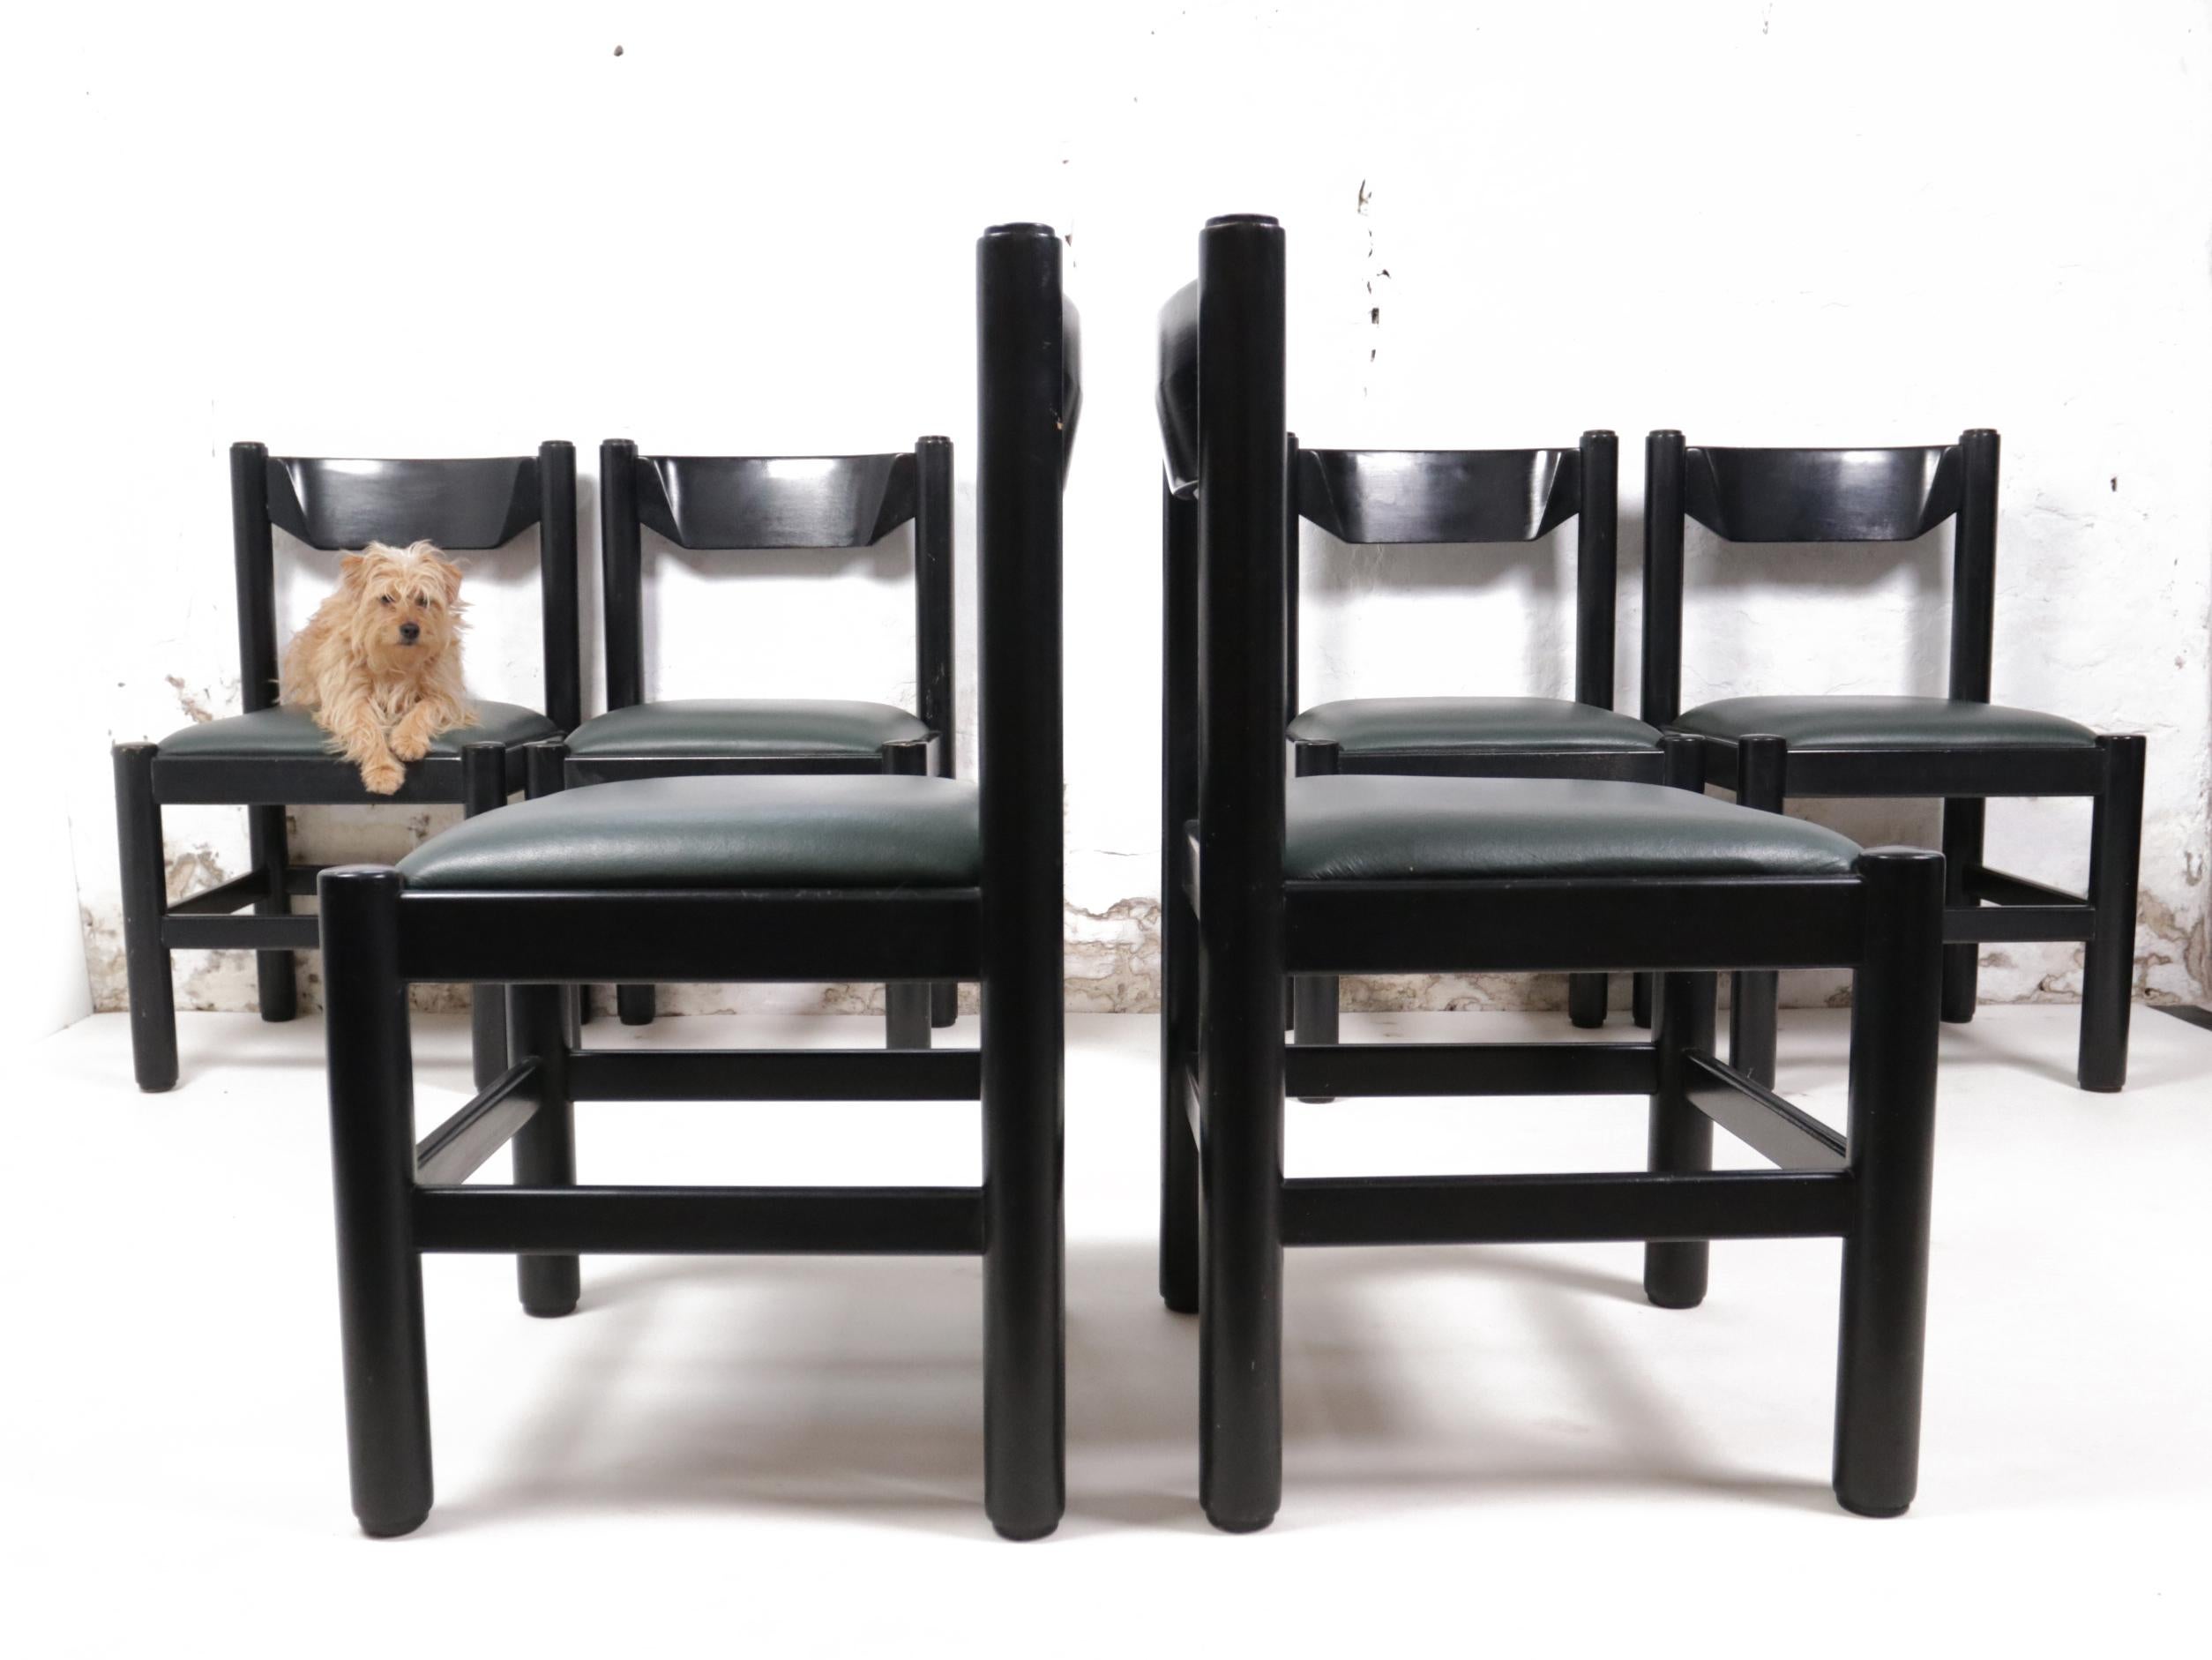 Beautiful design dining room chairs dating from the ‘70s.
These chairs are often attributed to Vico Magistretti, produced by Cassina, made in Italy. 
Made of solid black coated wood. The seats are made of leather.


